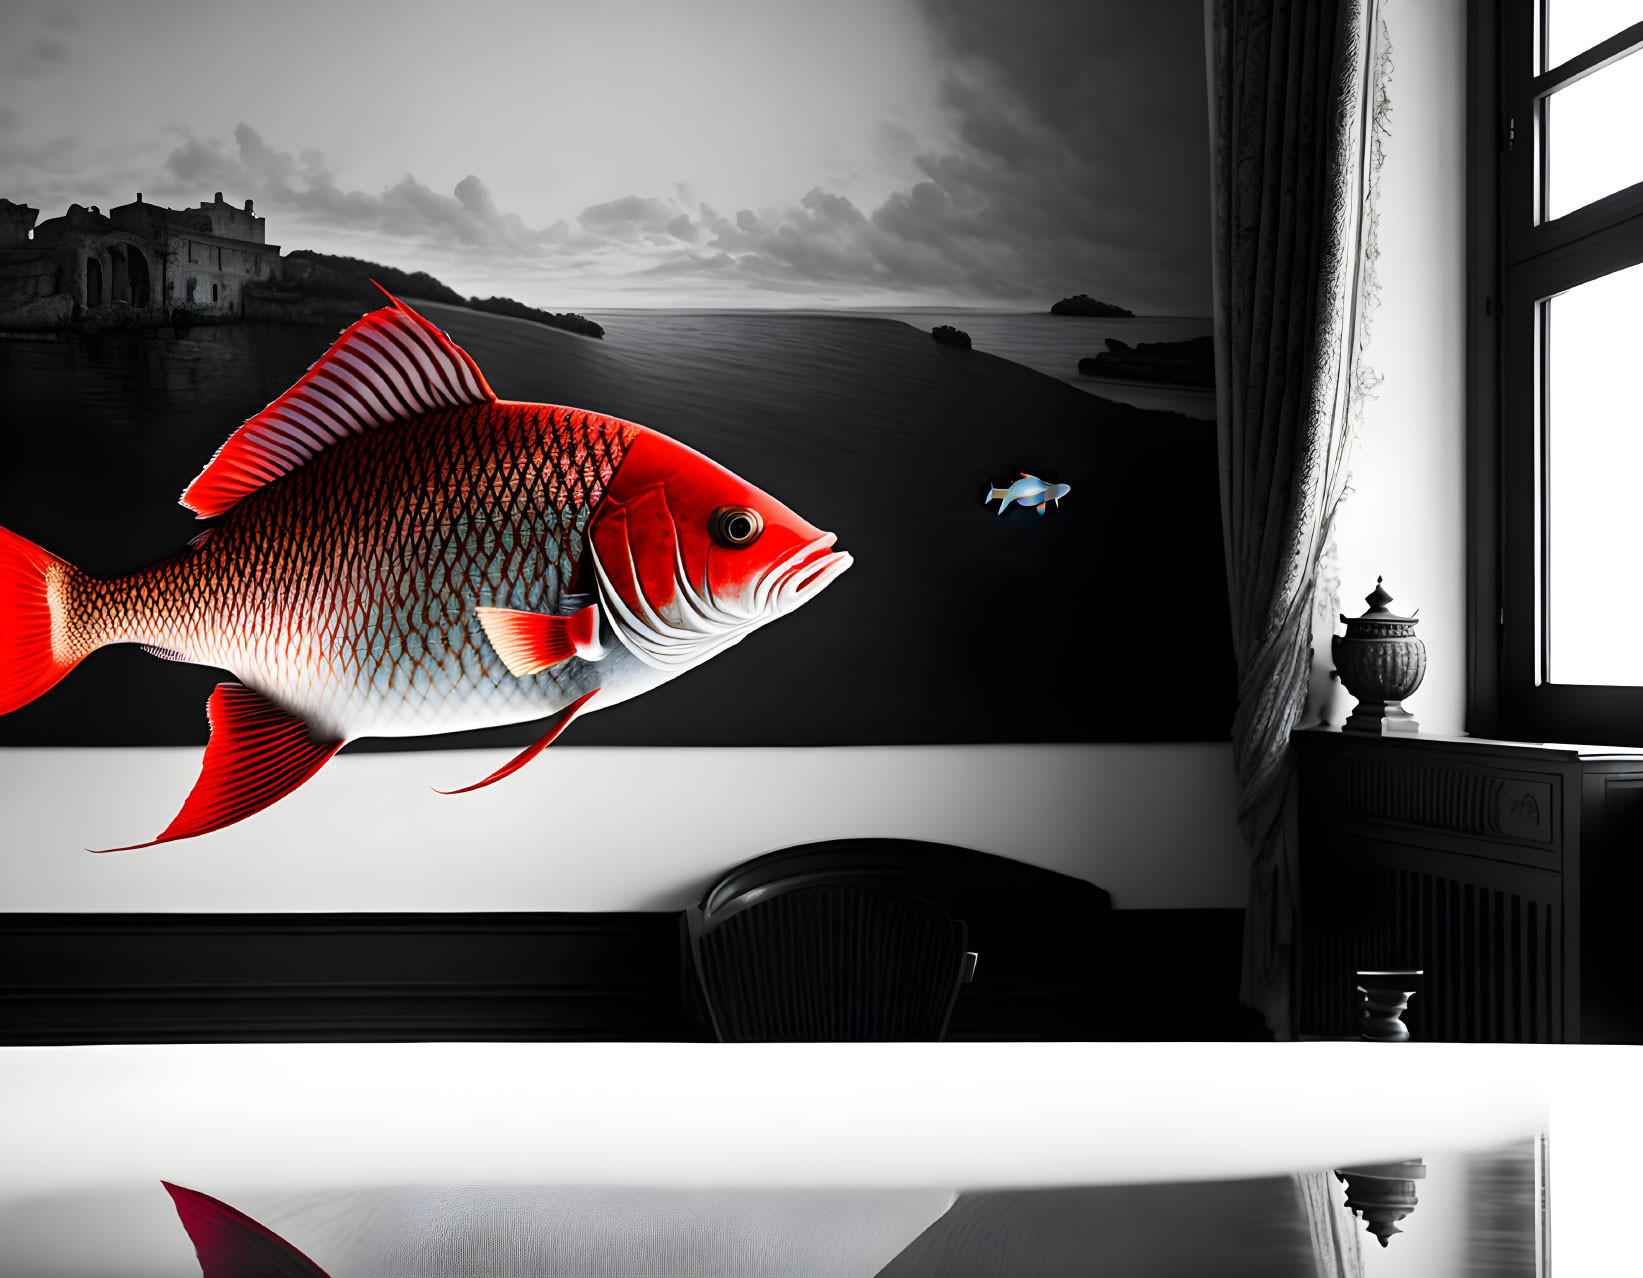 The Red Fish.